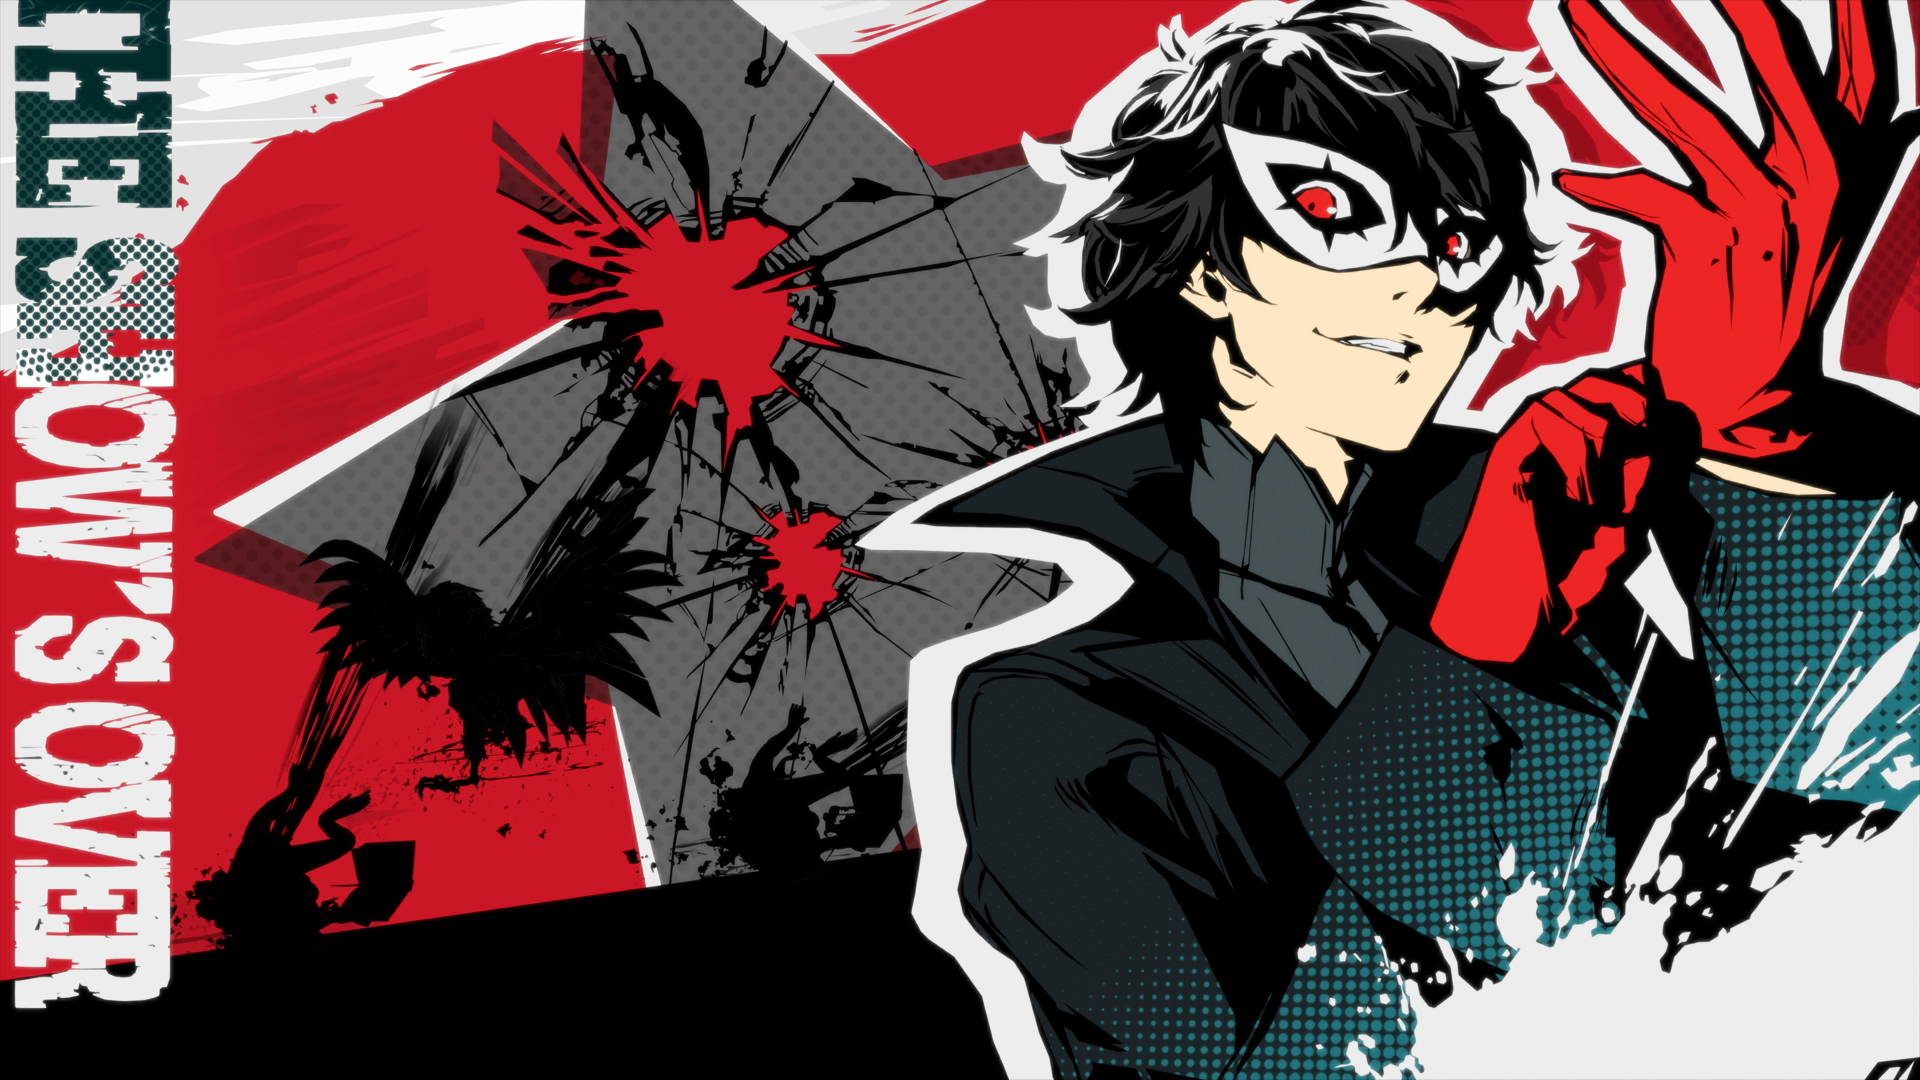 Persona 5 review: spectacular simulation of teenage life, Games